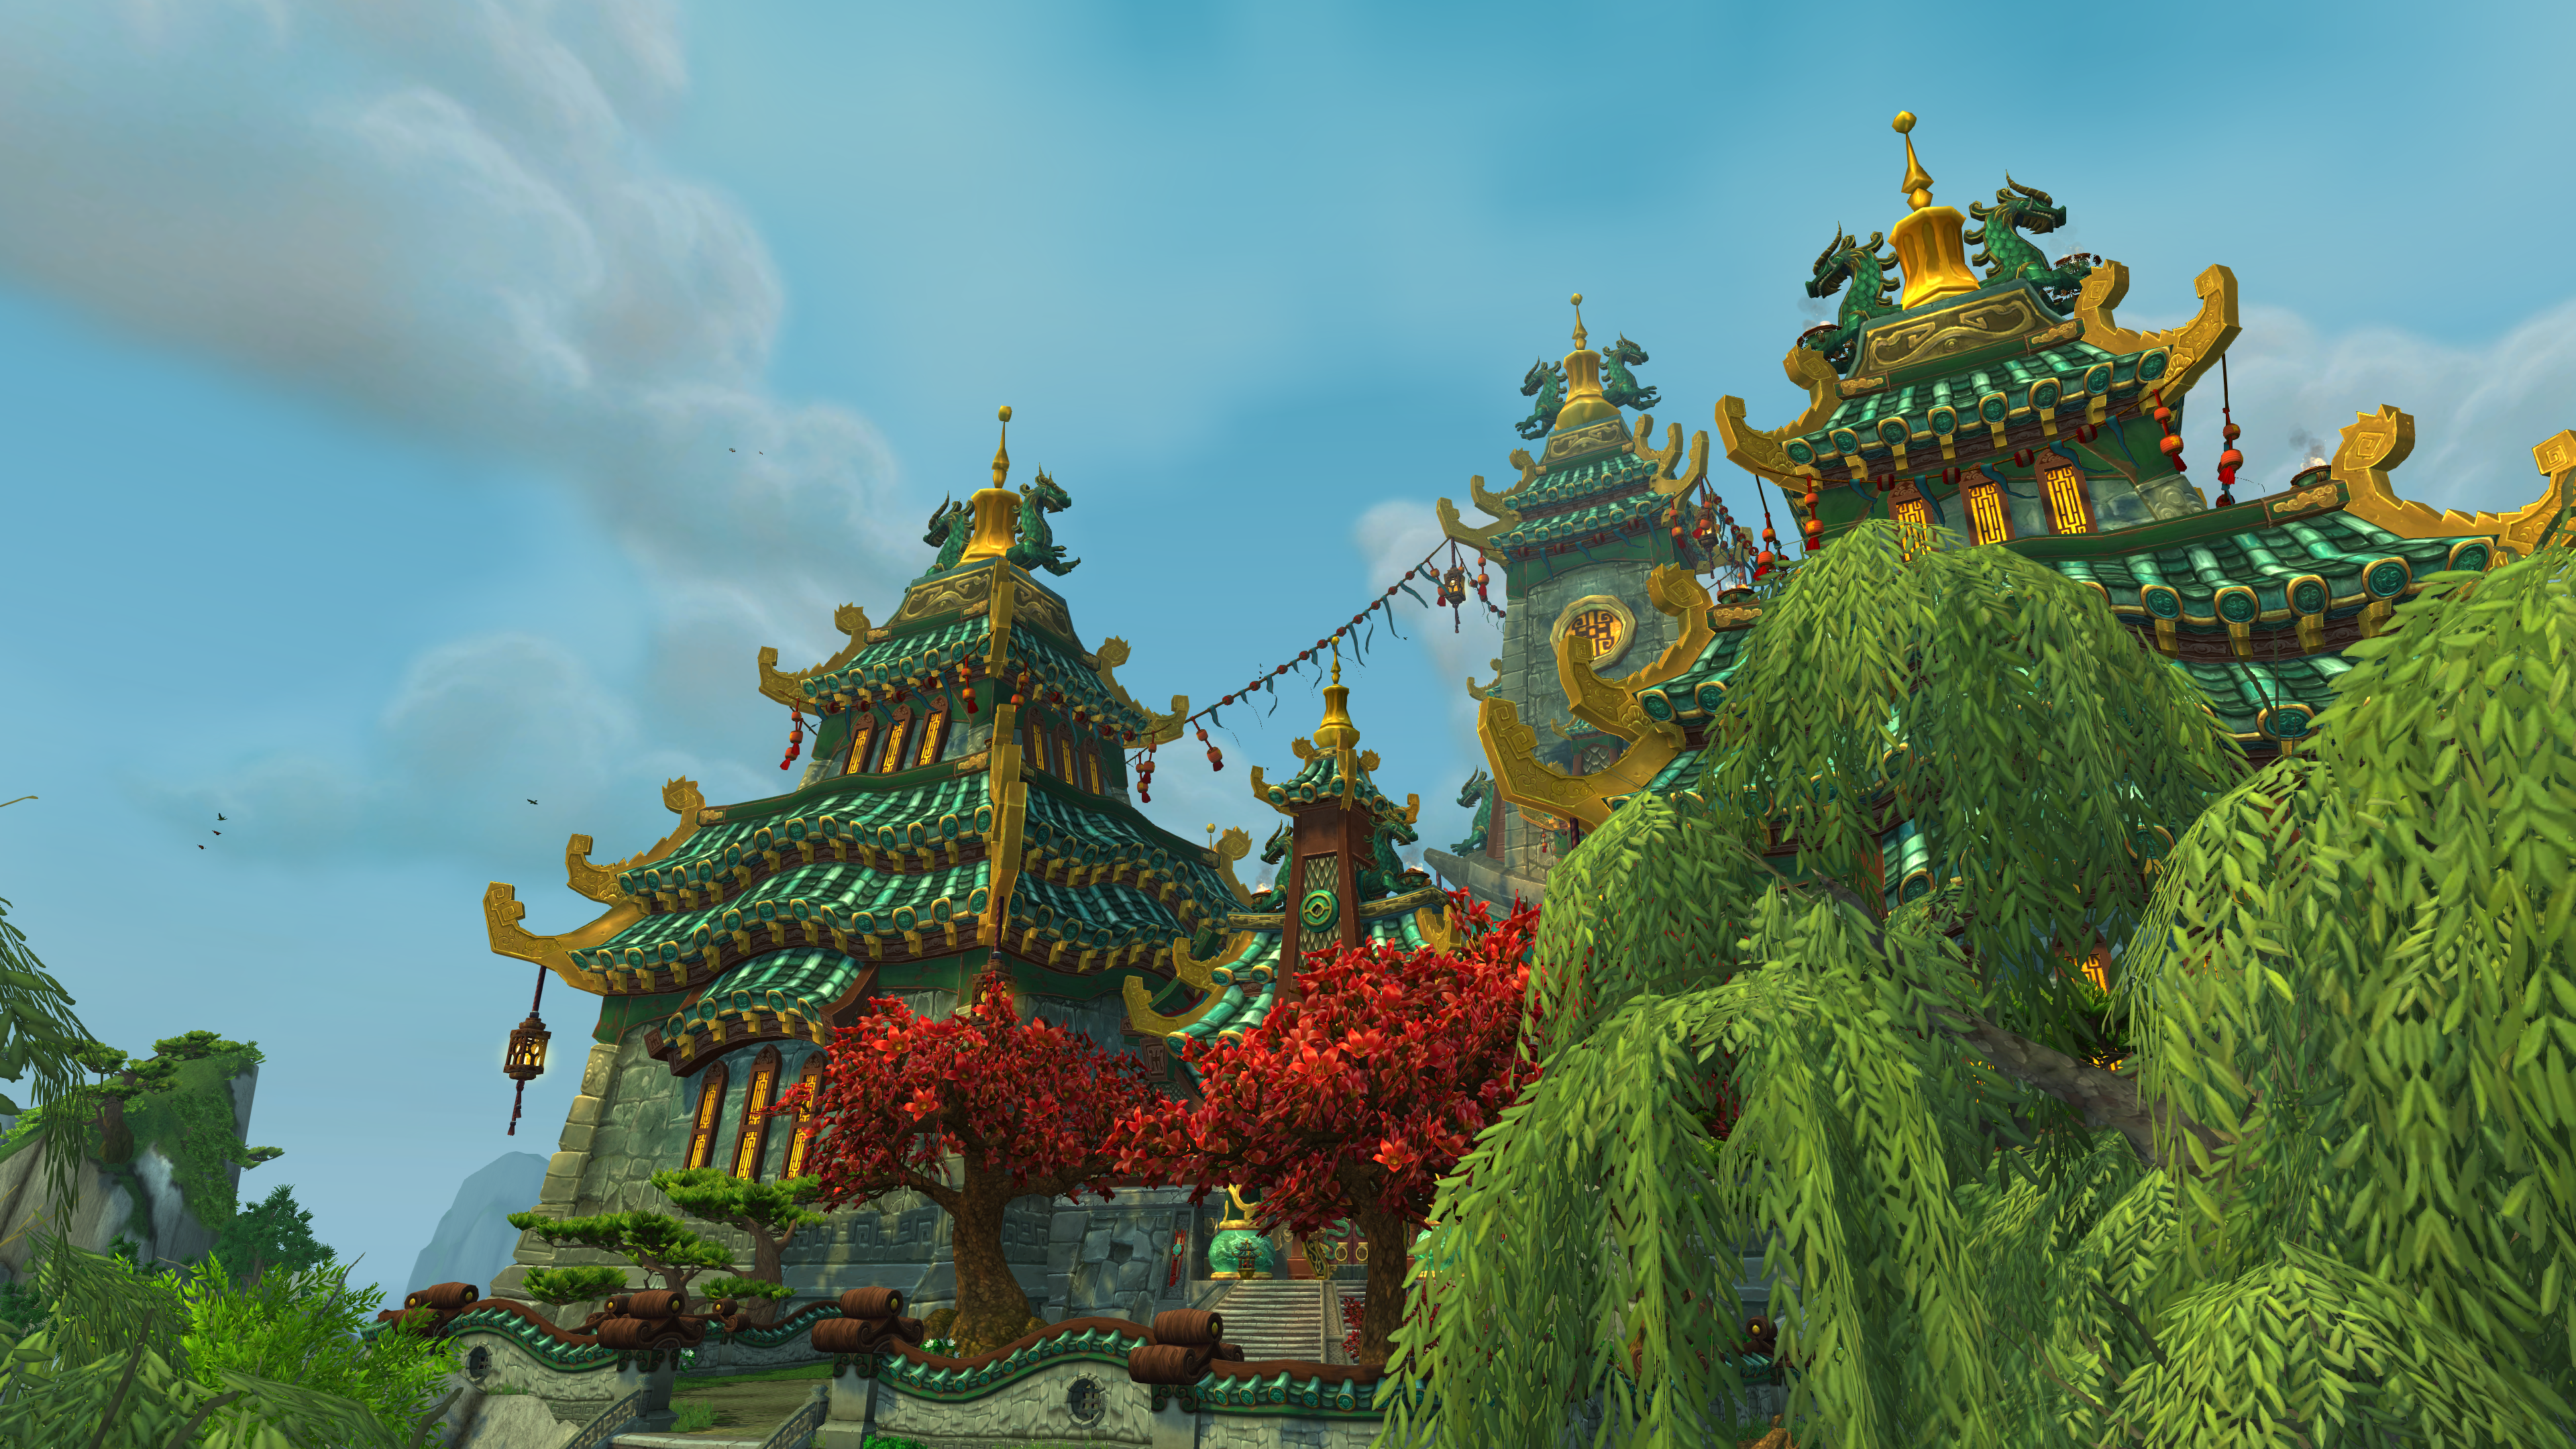 World Of Warcraft World Of Warcraft Mists Of Pandaria Video Games 3840x2160